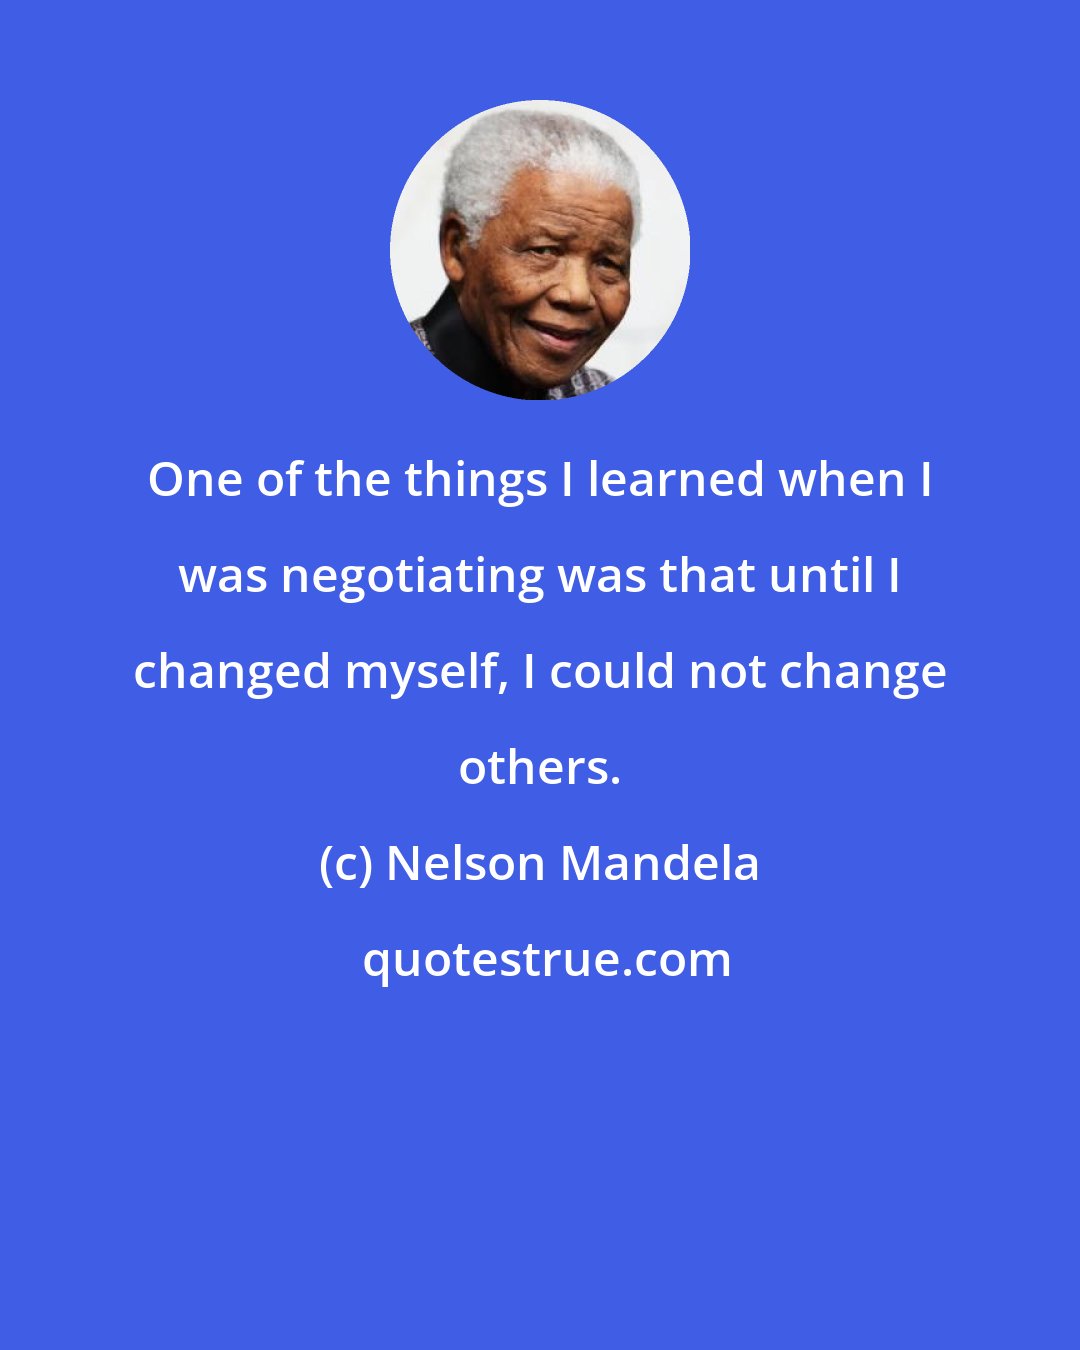 Nelson Mandela: One of the things I learned when I was negotiating was that until I changed myself, I could not change others.